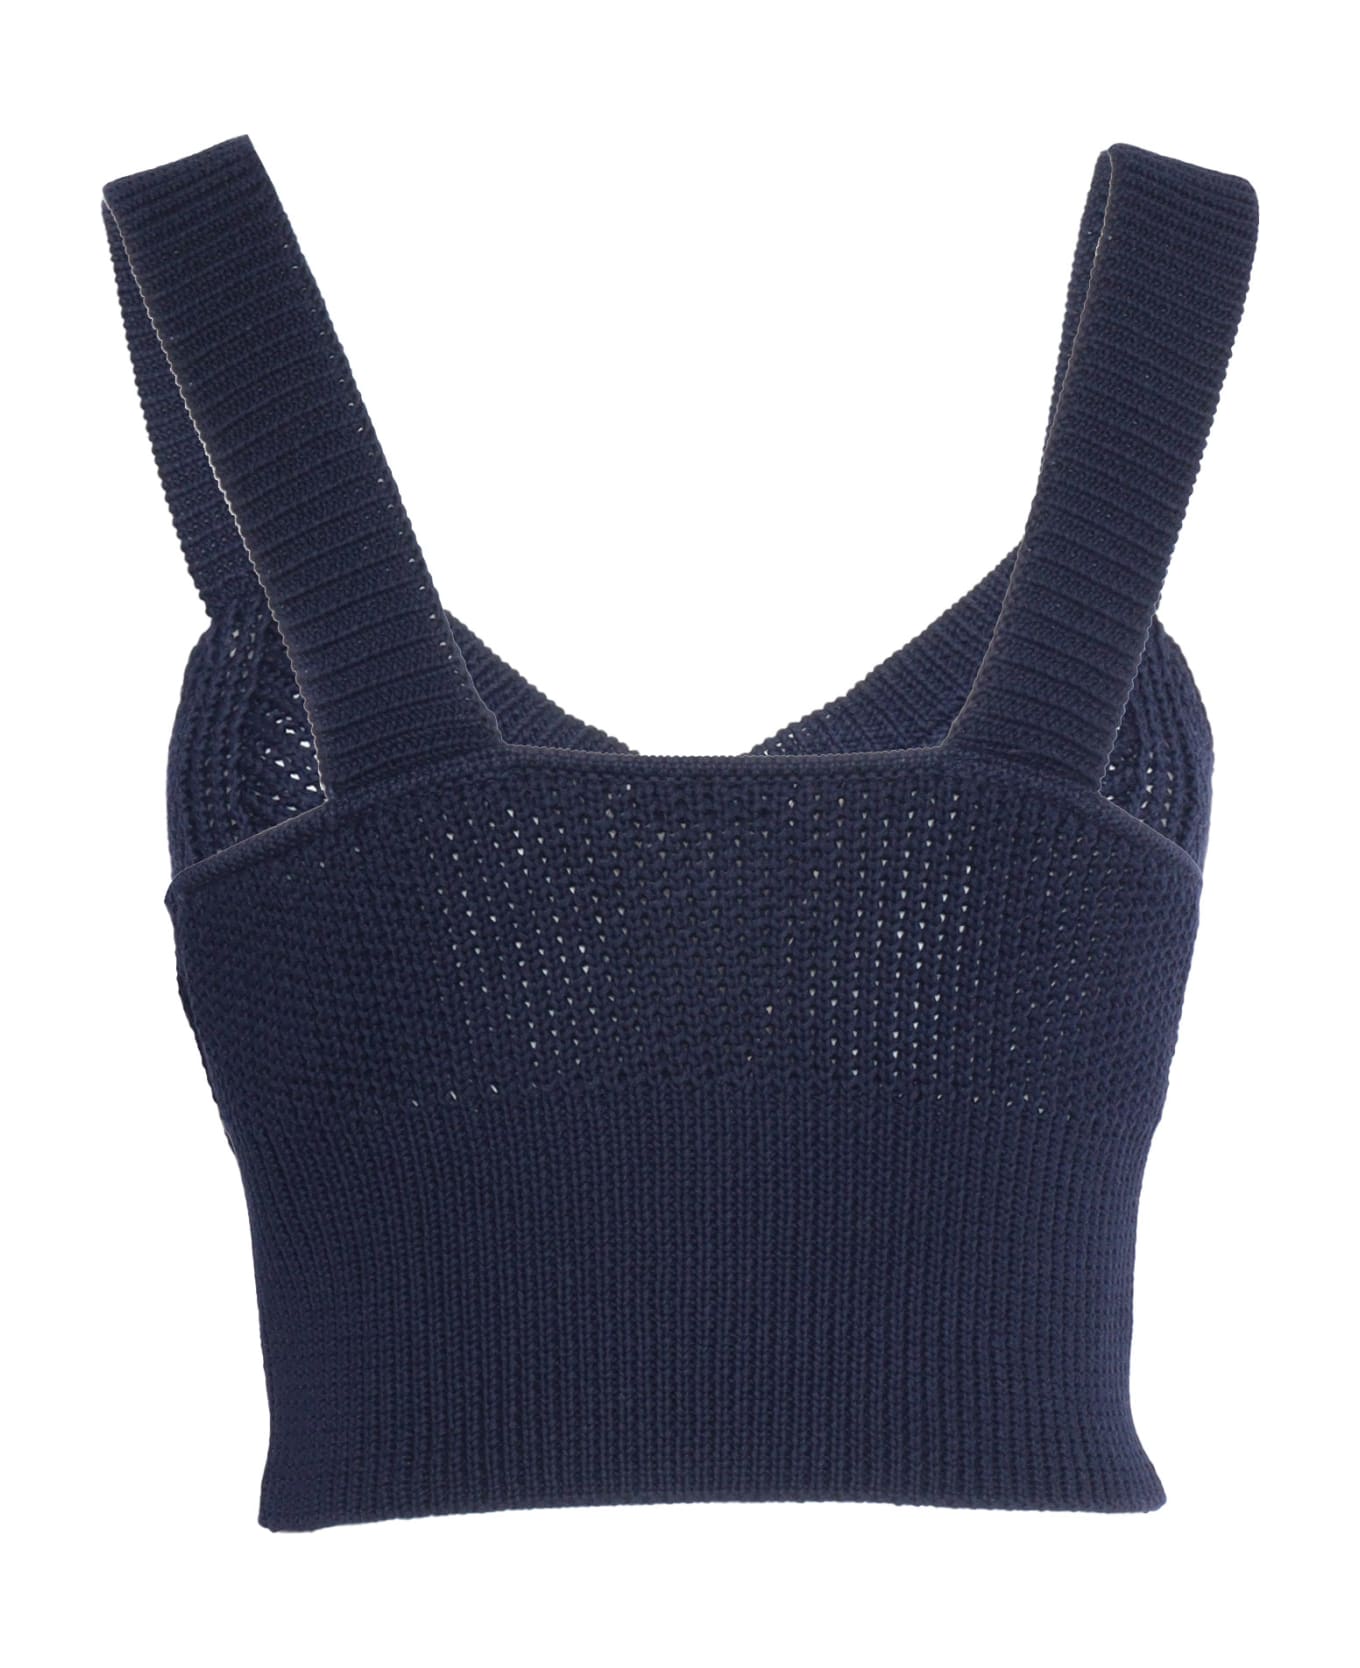 Ballantyne Perforated Blue Top - BLUE